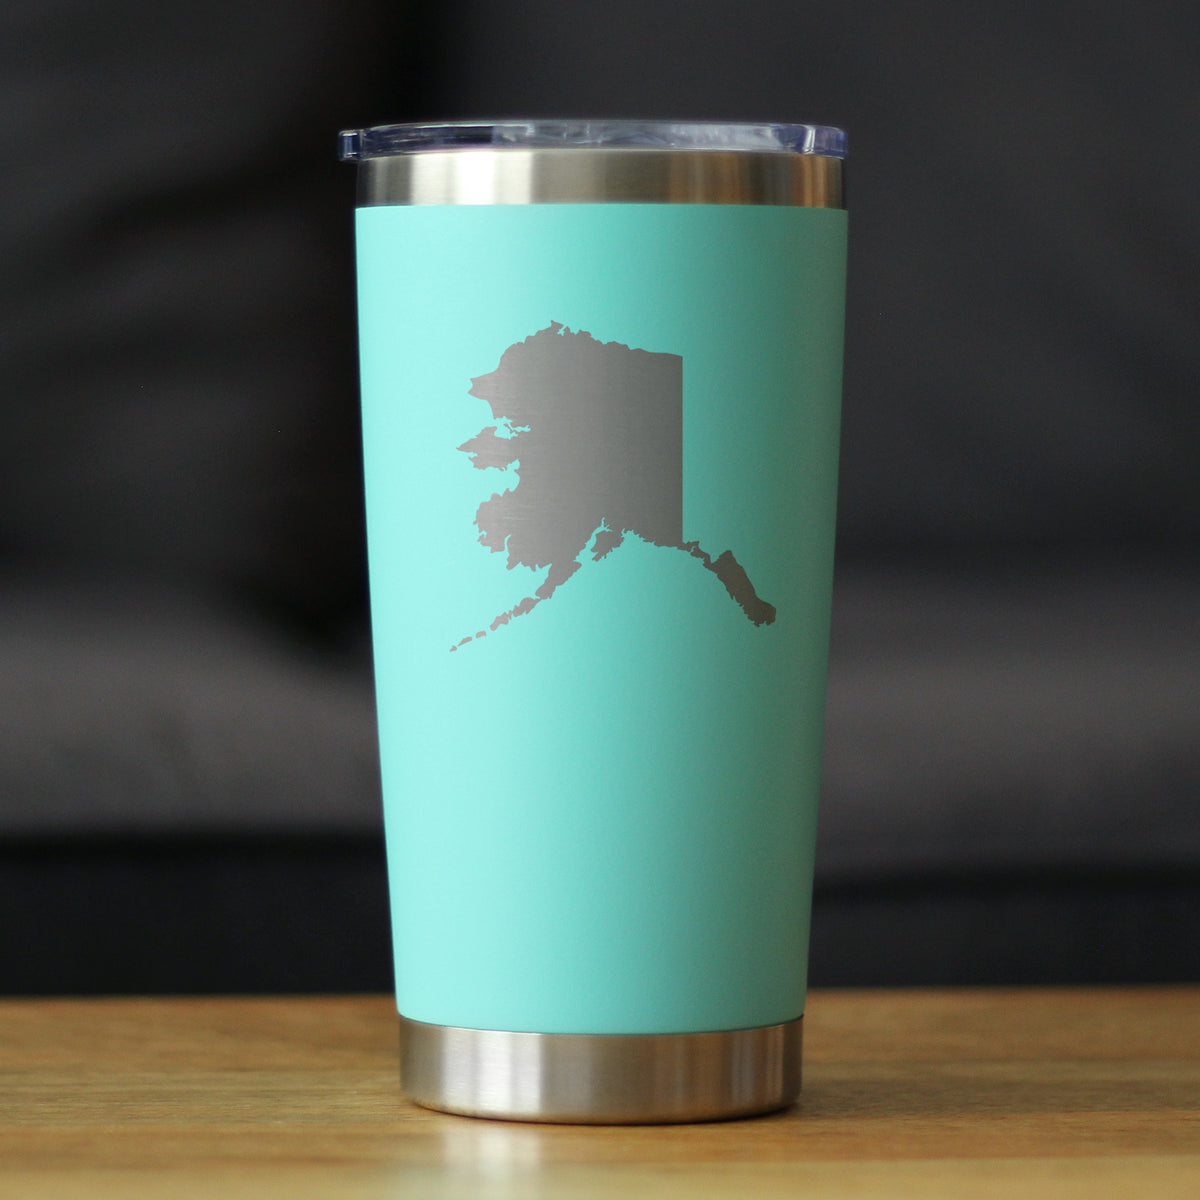 Alaska State Outline - Insulated Coffee Tumbler Cup with Sliding Lid - Stainless Steel Travel Mug - Alaska Gifts and Decor for Women and Men Alaskans